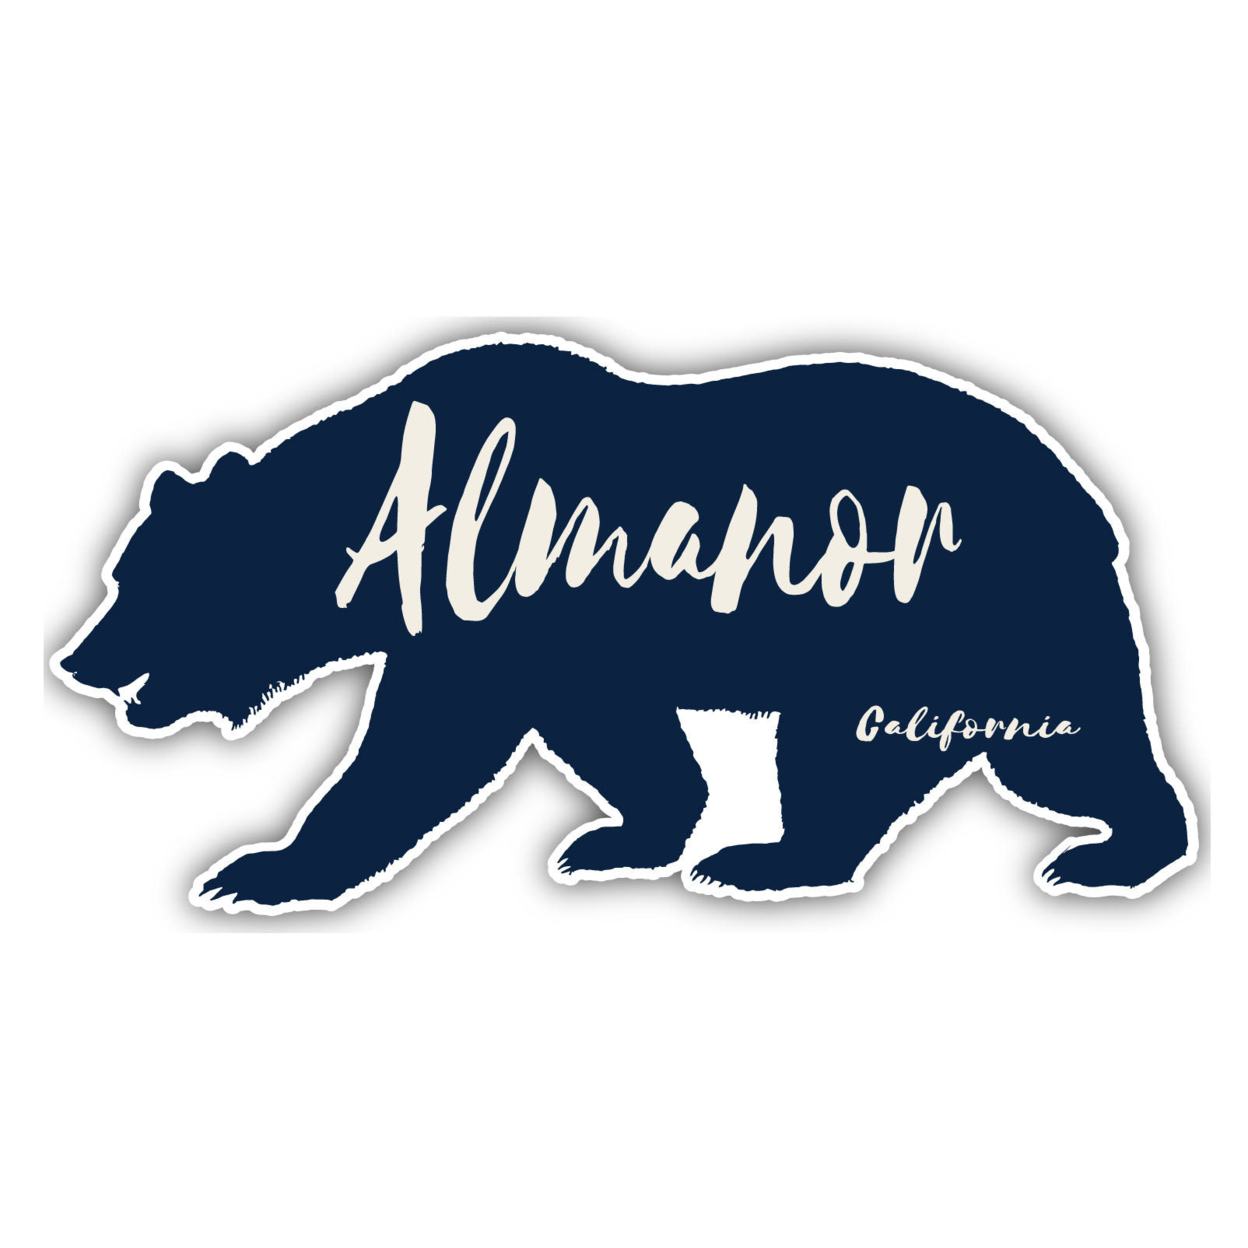 Almanor California Souvenir Decorative Stickers (Choose Theme And Size) - 4-Pack, 8-Inch, Bear